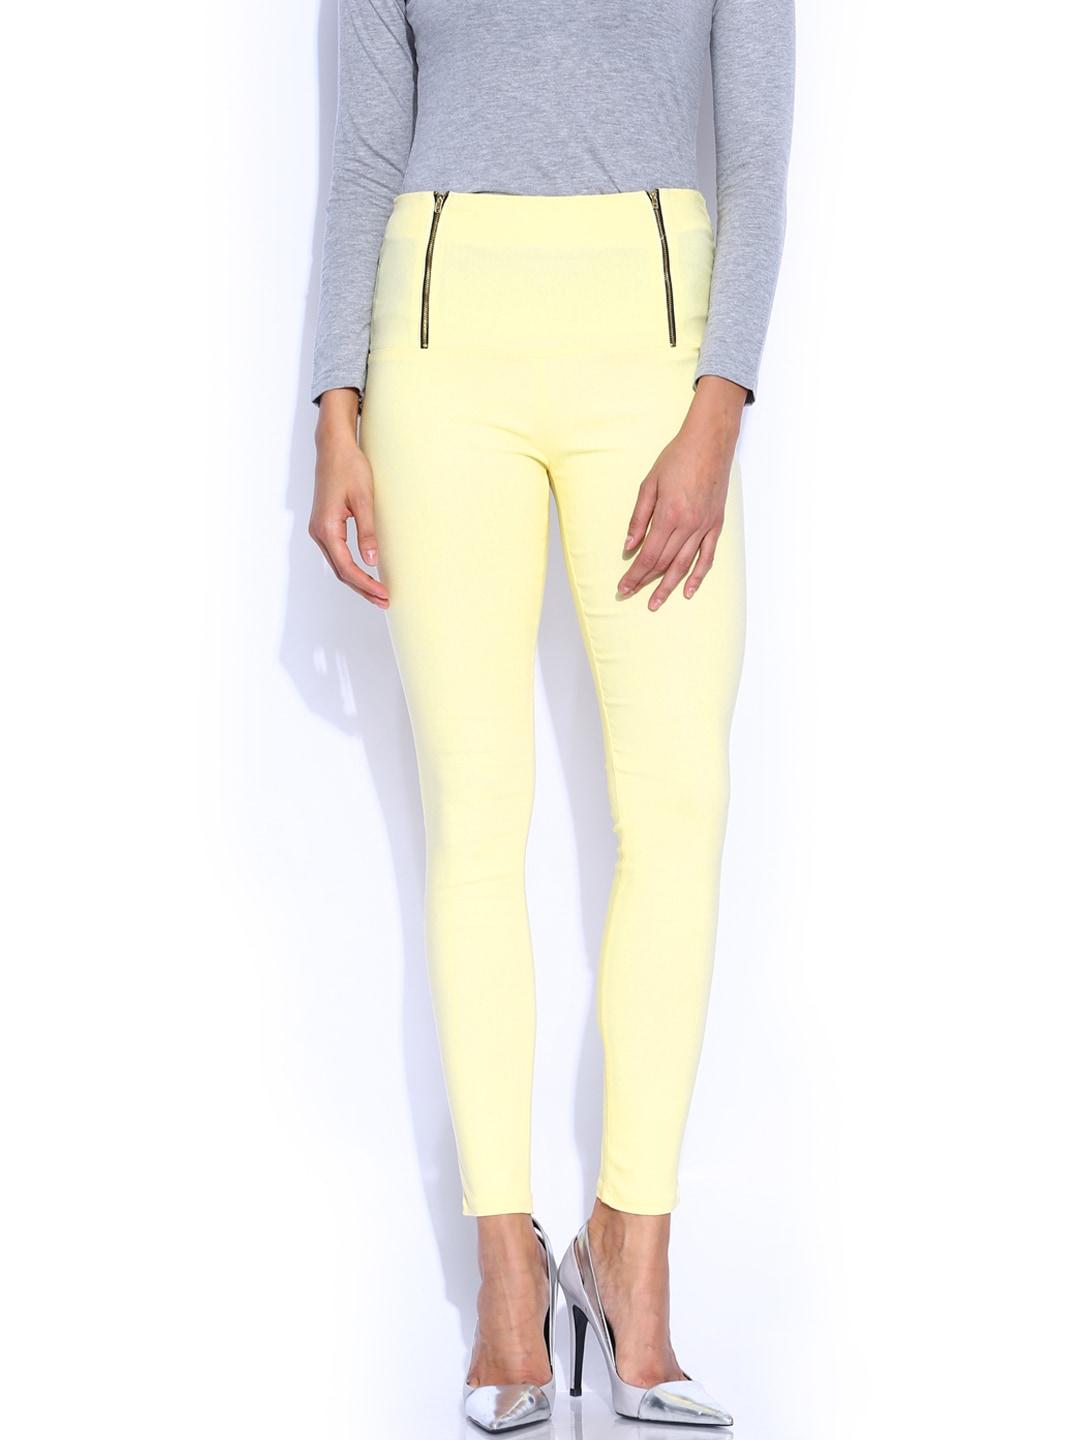 miss-chase-yellow-retro-high-waist-jeggings